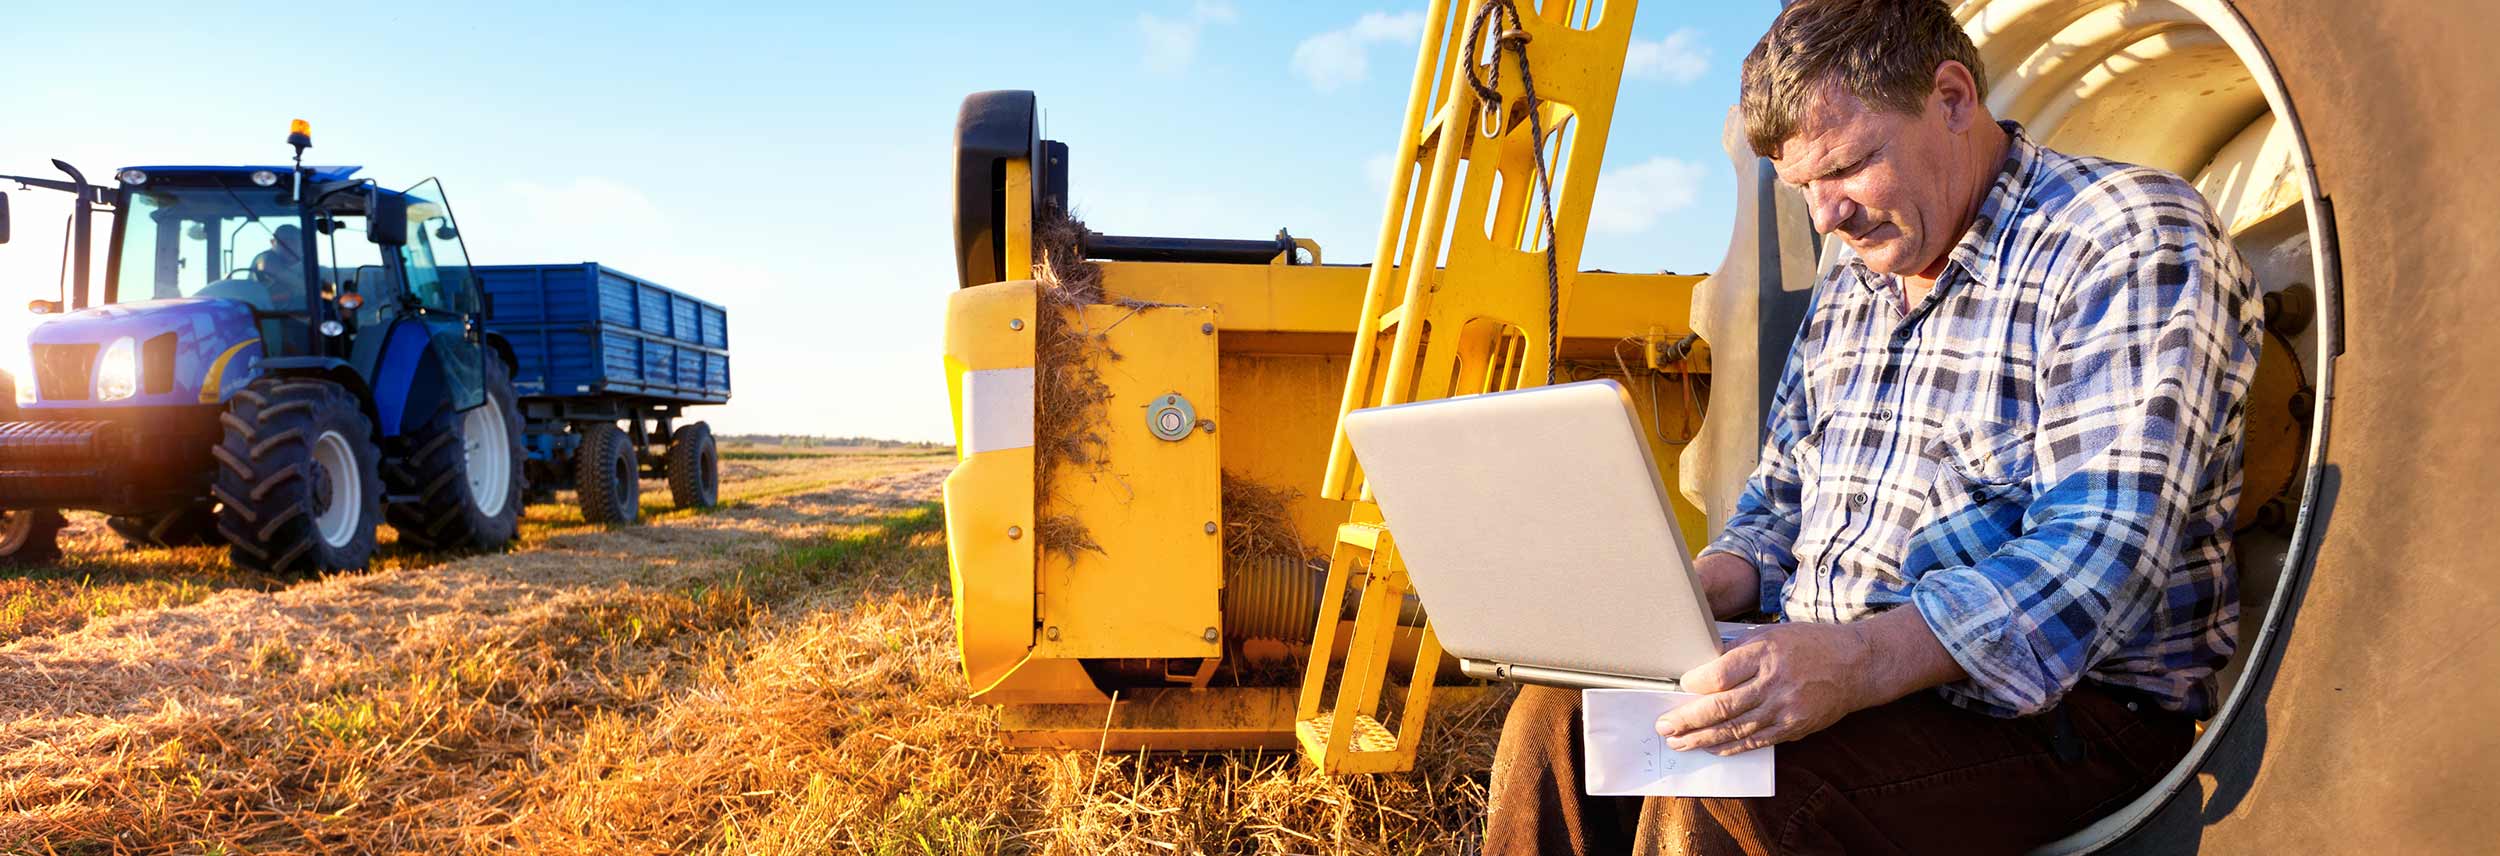 Farmer with Laptop in the field with harvesting equipment